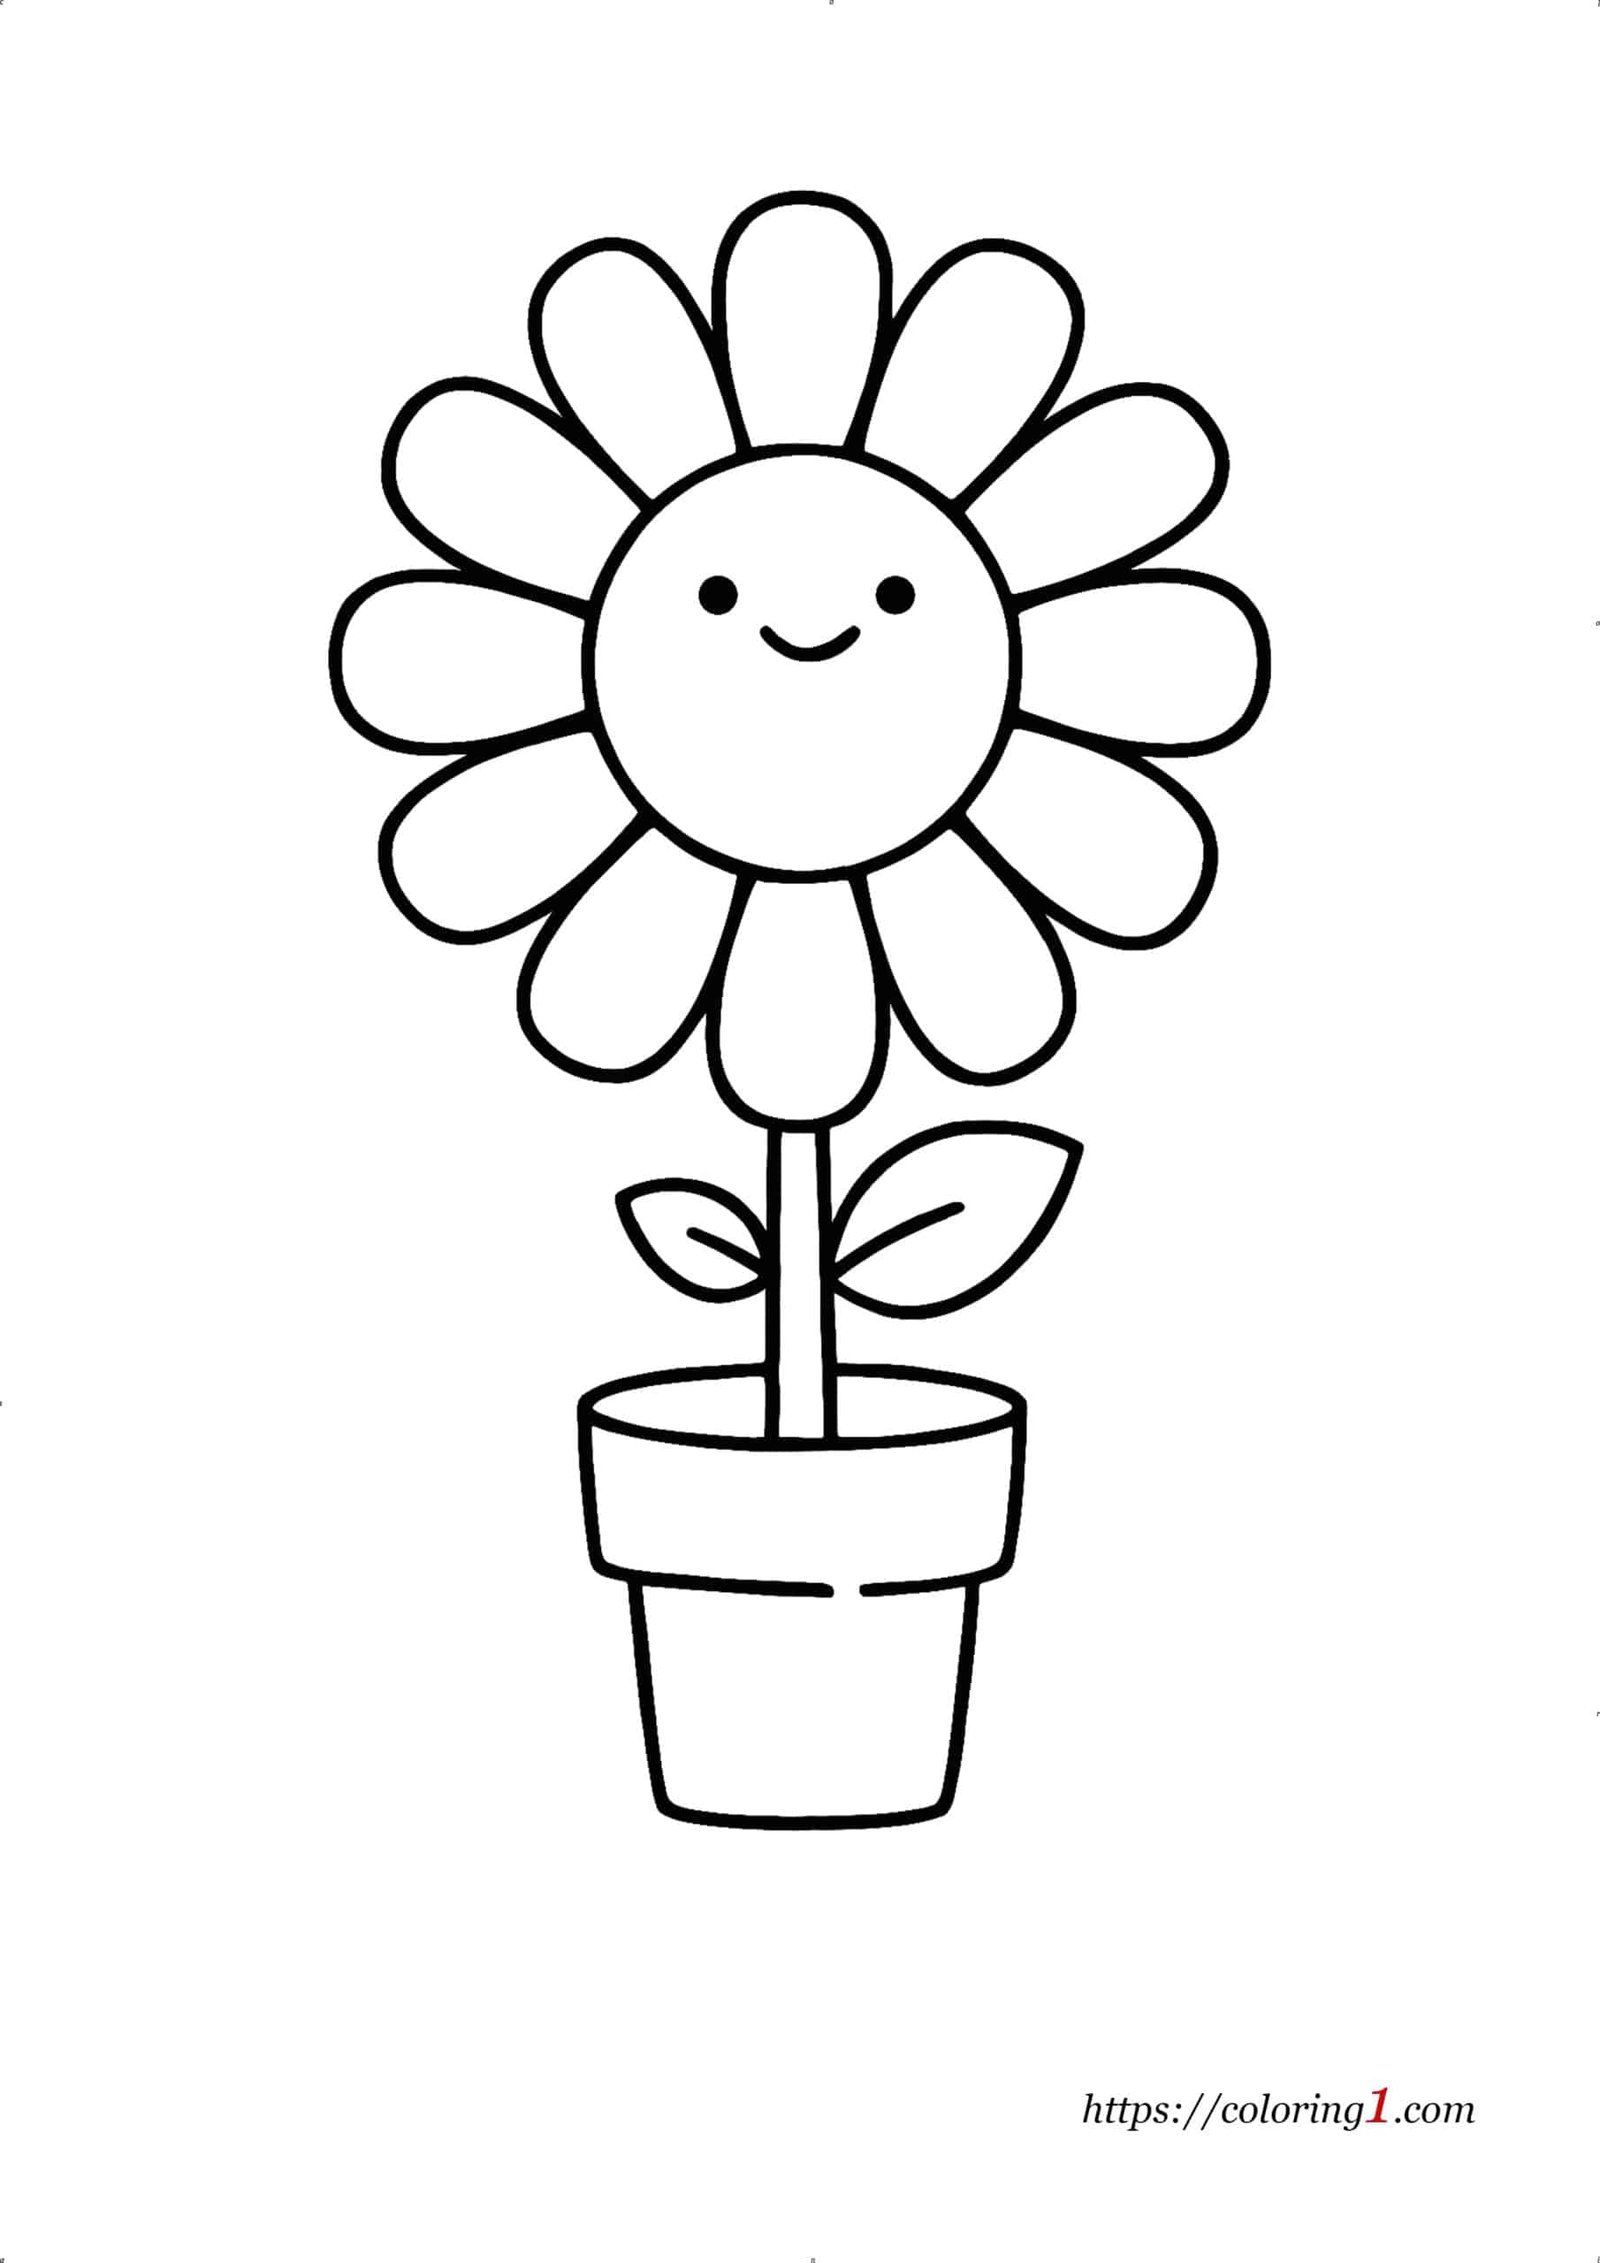 Cute Flower coloring page